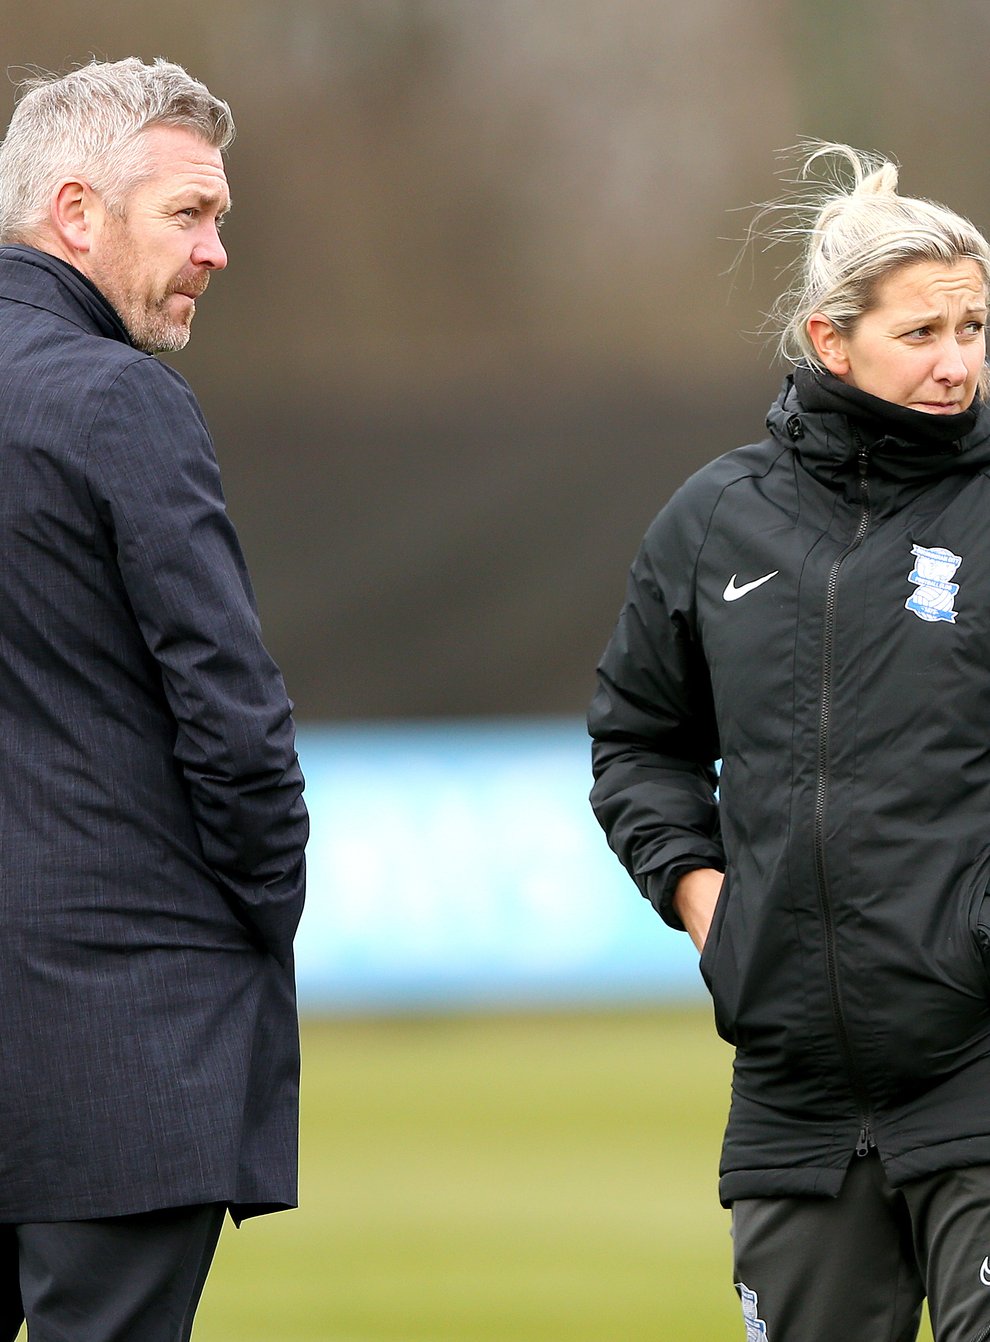 Birmingham Women manager Carla Ward has resigned from her role, and will leave the club at the end of the season